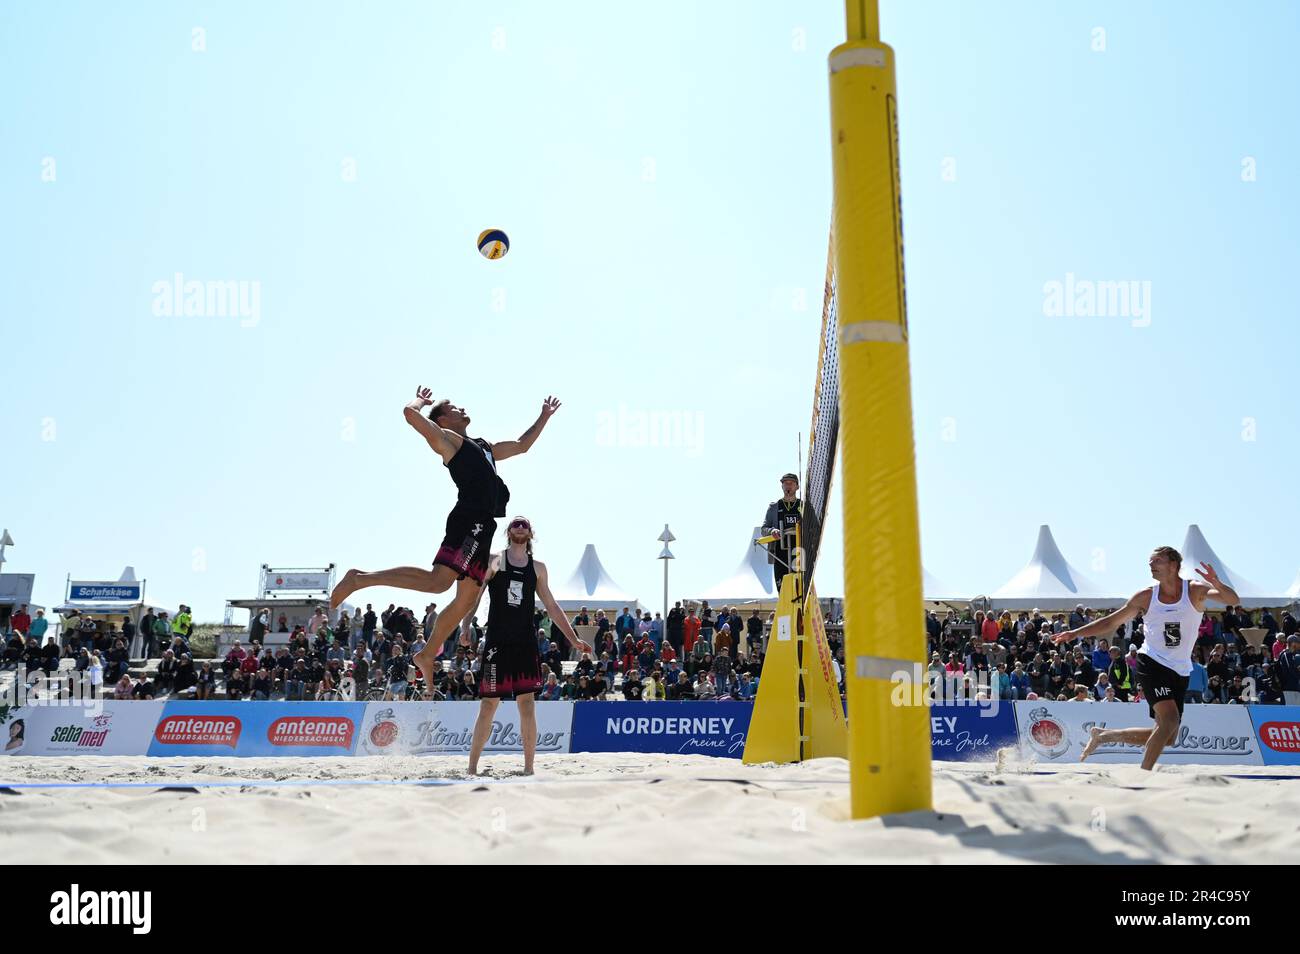 Norderney, Germany. 27th May, 2023. Eric Stadie of the team 'Hauptstadt Beacher e.V/ VC Olympia ' defends the ball and strikes back. The 'White Sands Festival' takes place on Norderney from May 26 to 28. Excursion weather in large parts of Germany: Over the Whitsun weekend into the coming week partly summery temperatures over 25 degrees are expected. Almost everywhere it will remain mostly dry in the coming days with scattered clouds, as predicted by the German Weather Service. In the Alps, however, there could also be thunderstorms. Credit: Lars Penning (klemmer)/dpa/Alamy Live News Stock Photo